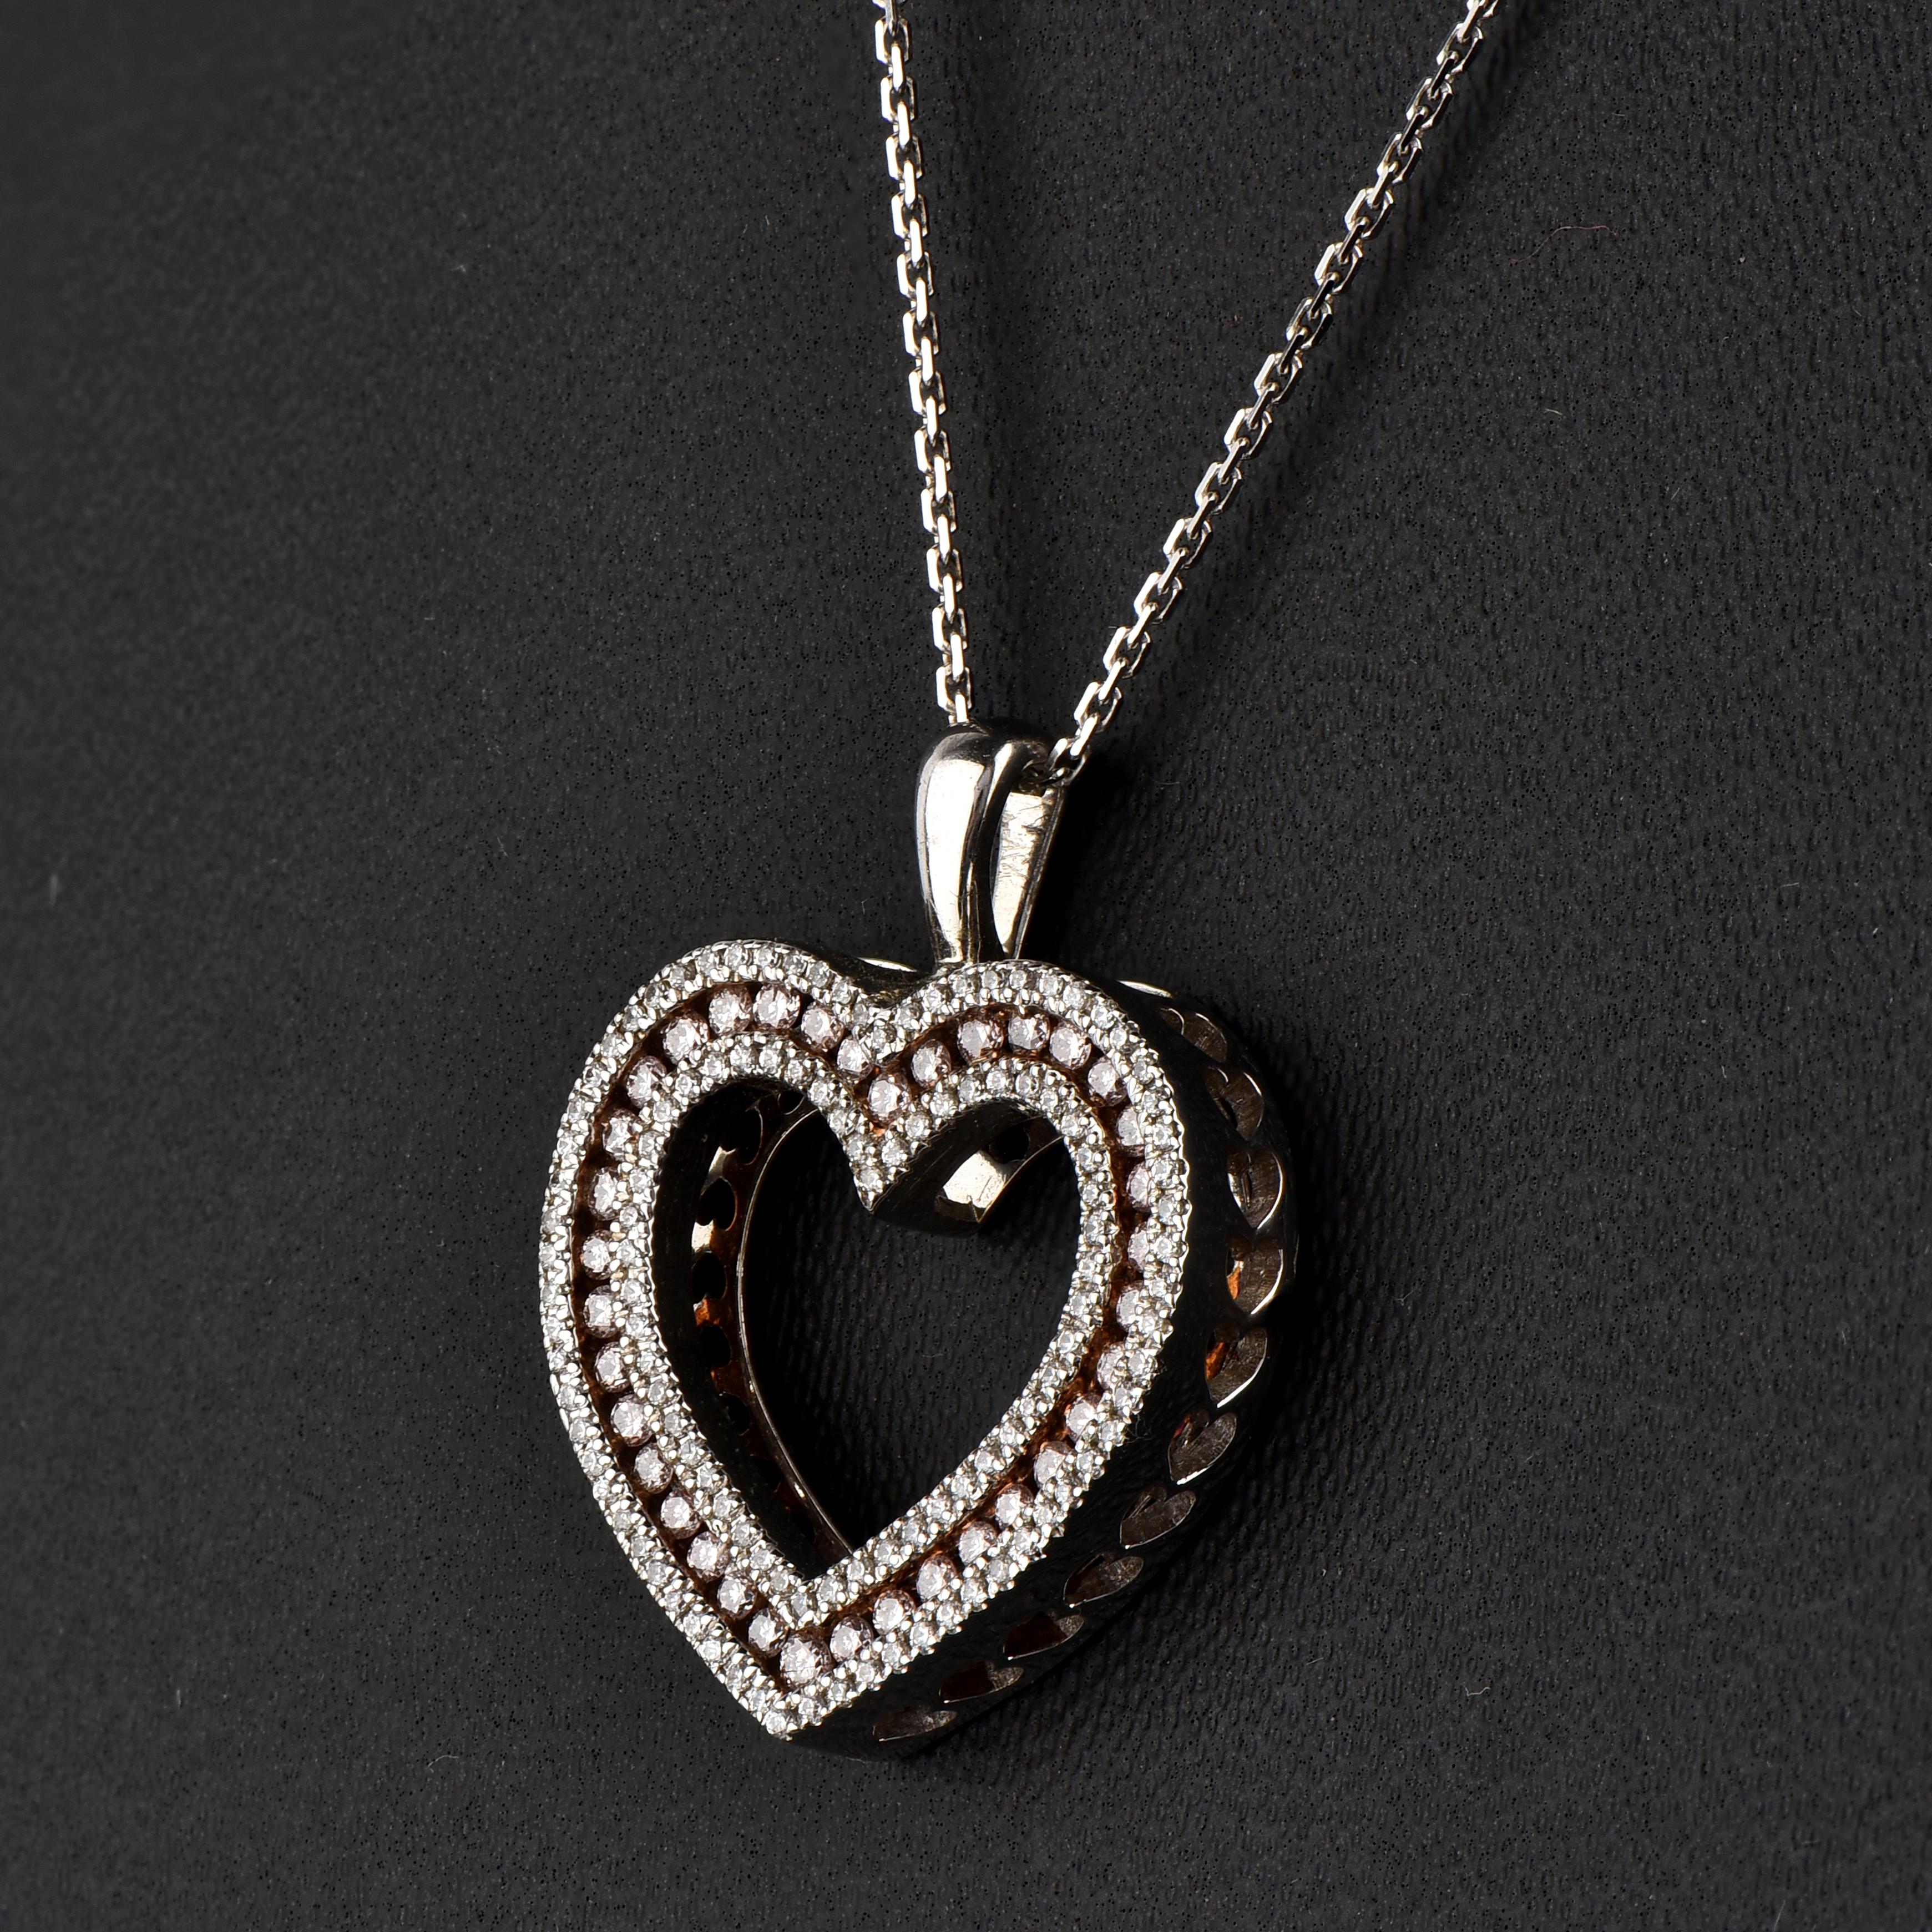 A striking addition when worn on its own, this diamond double heart pendant makes a stunning impression. The pendant is crafted from 18-karat White gold and features Round Brilliant 116 white and 36 pink diamonds, Micro Pave & channel set, H-I color